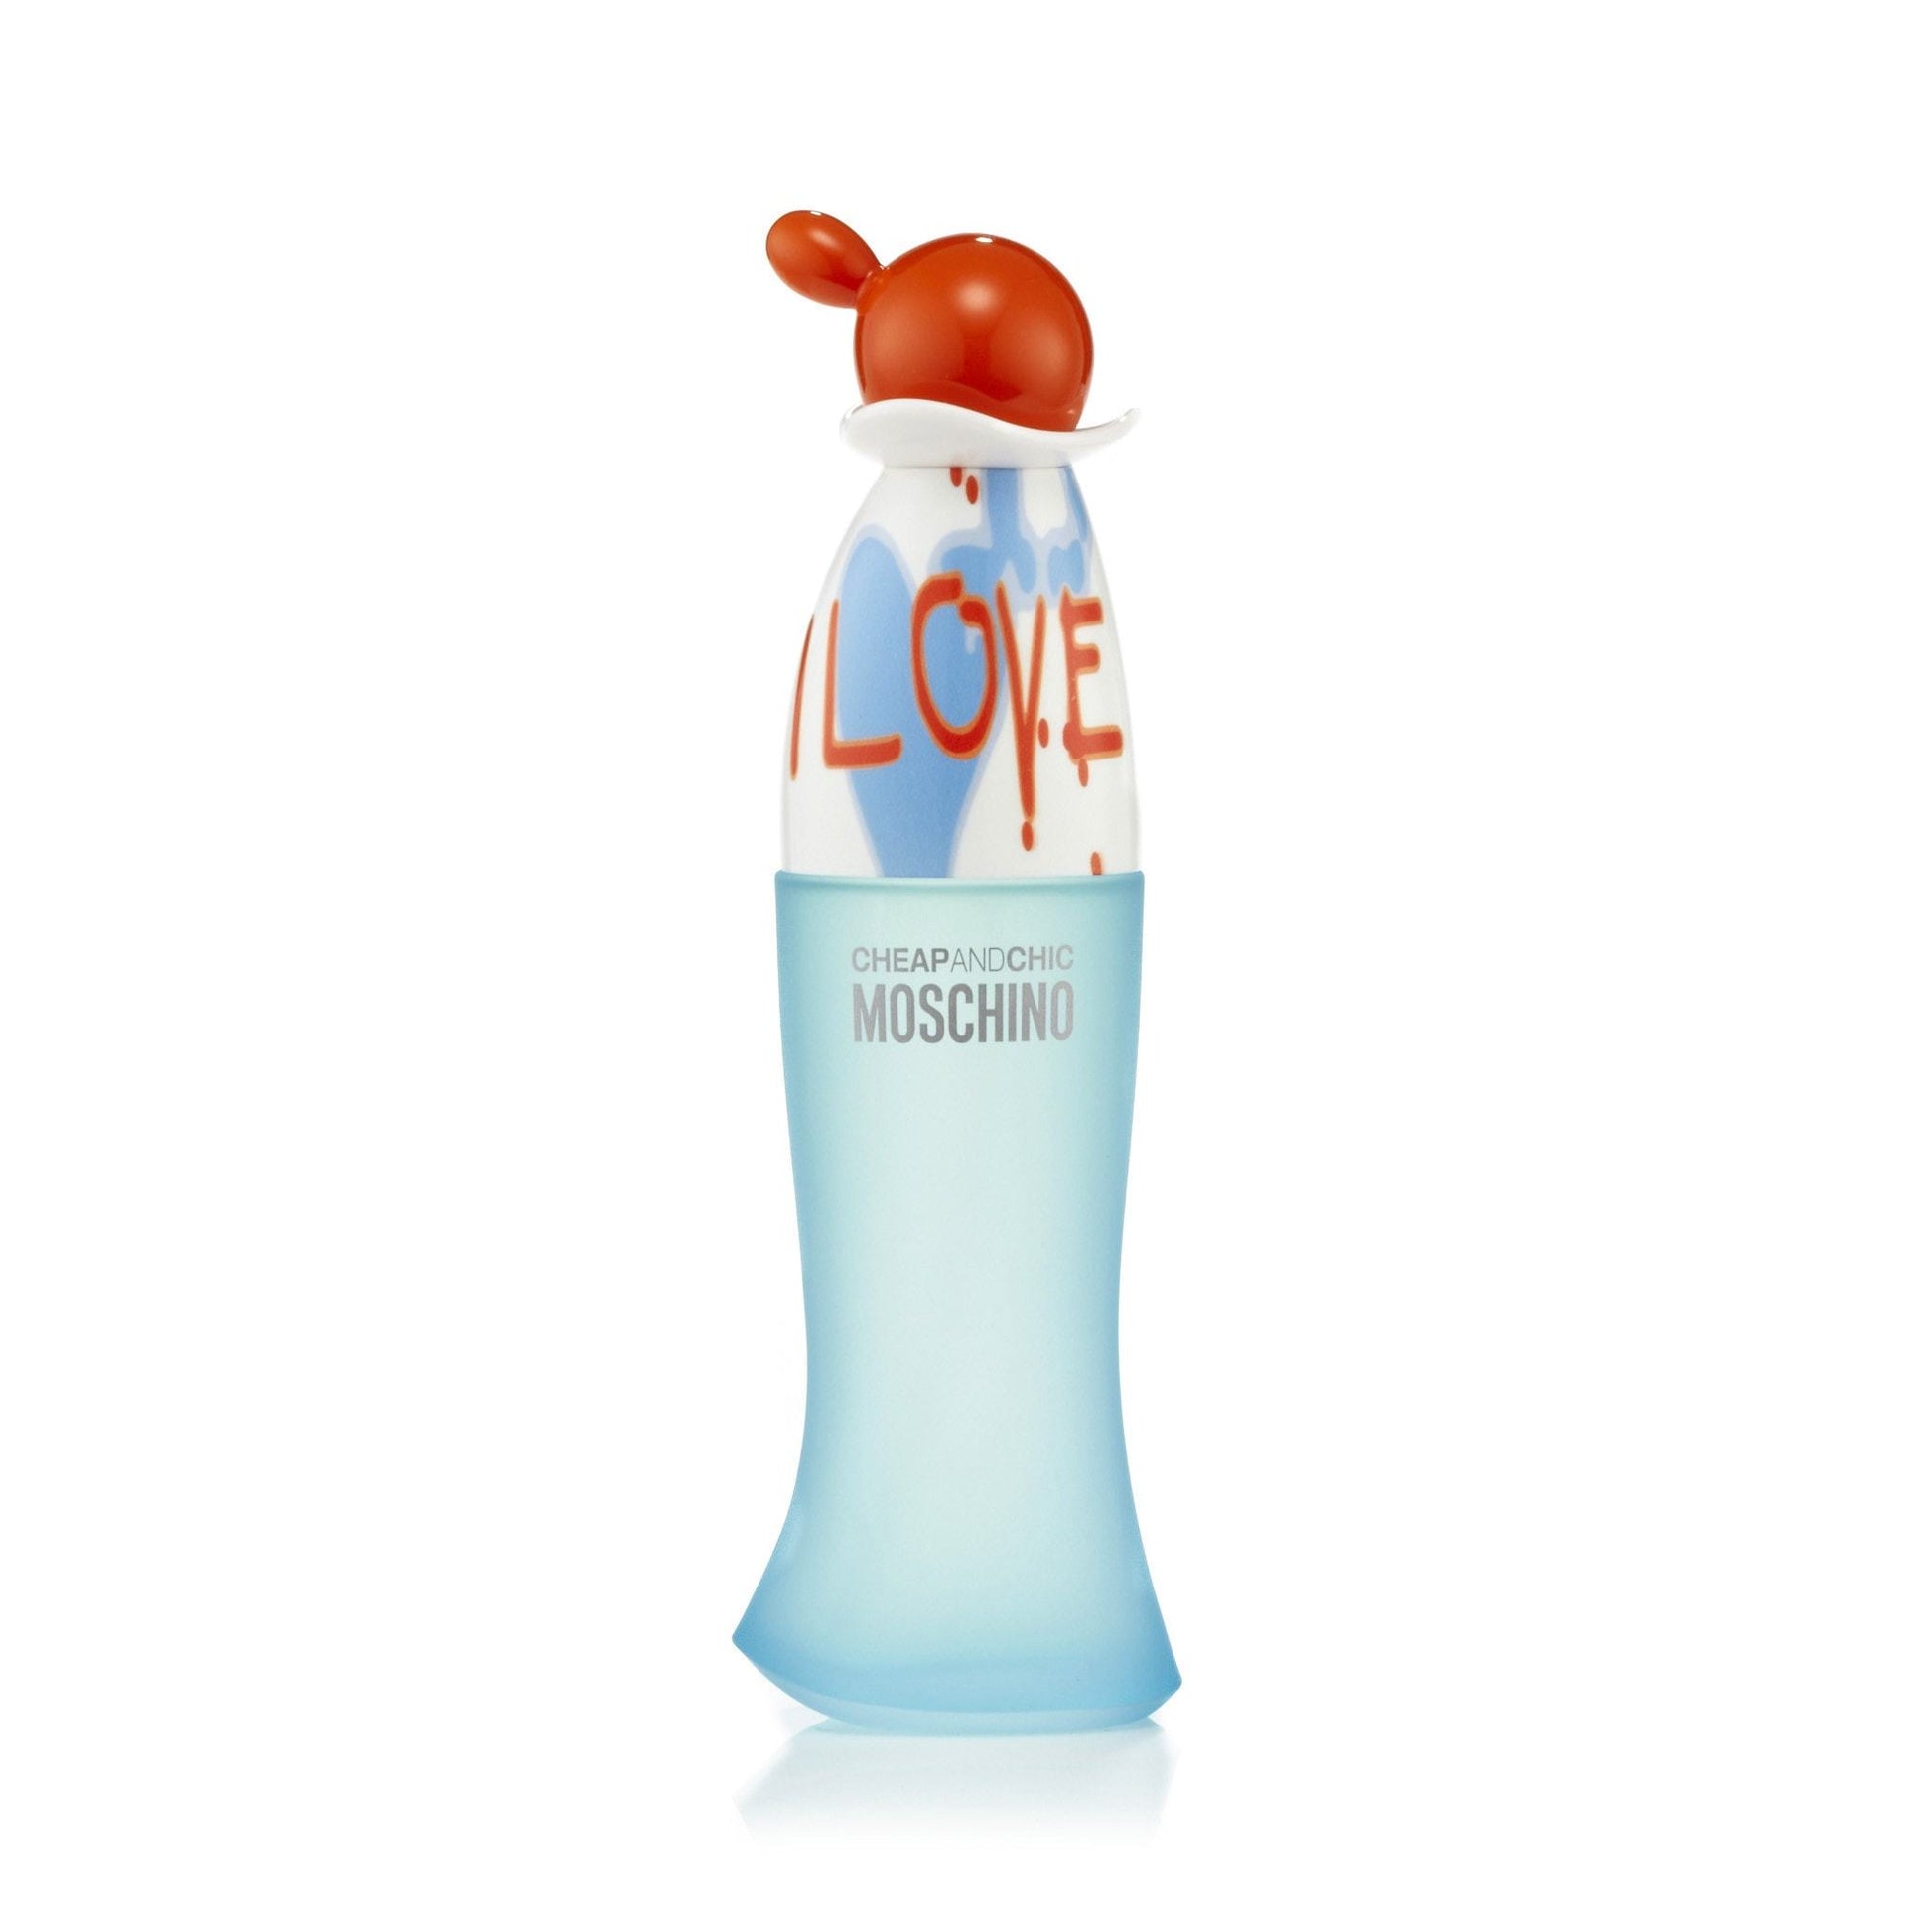 I Love Love Eau de Toilette Spray for Women by Moschino, Product image 1